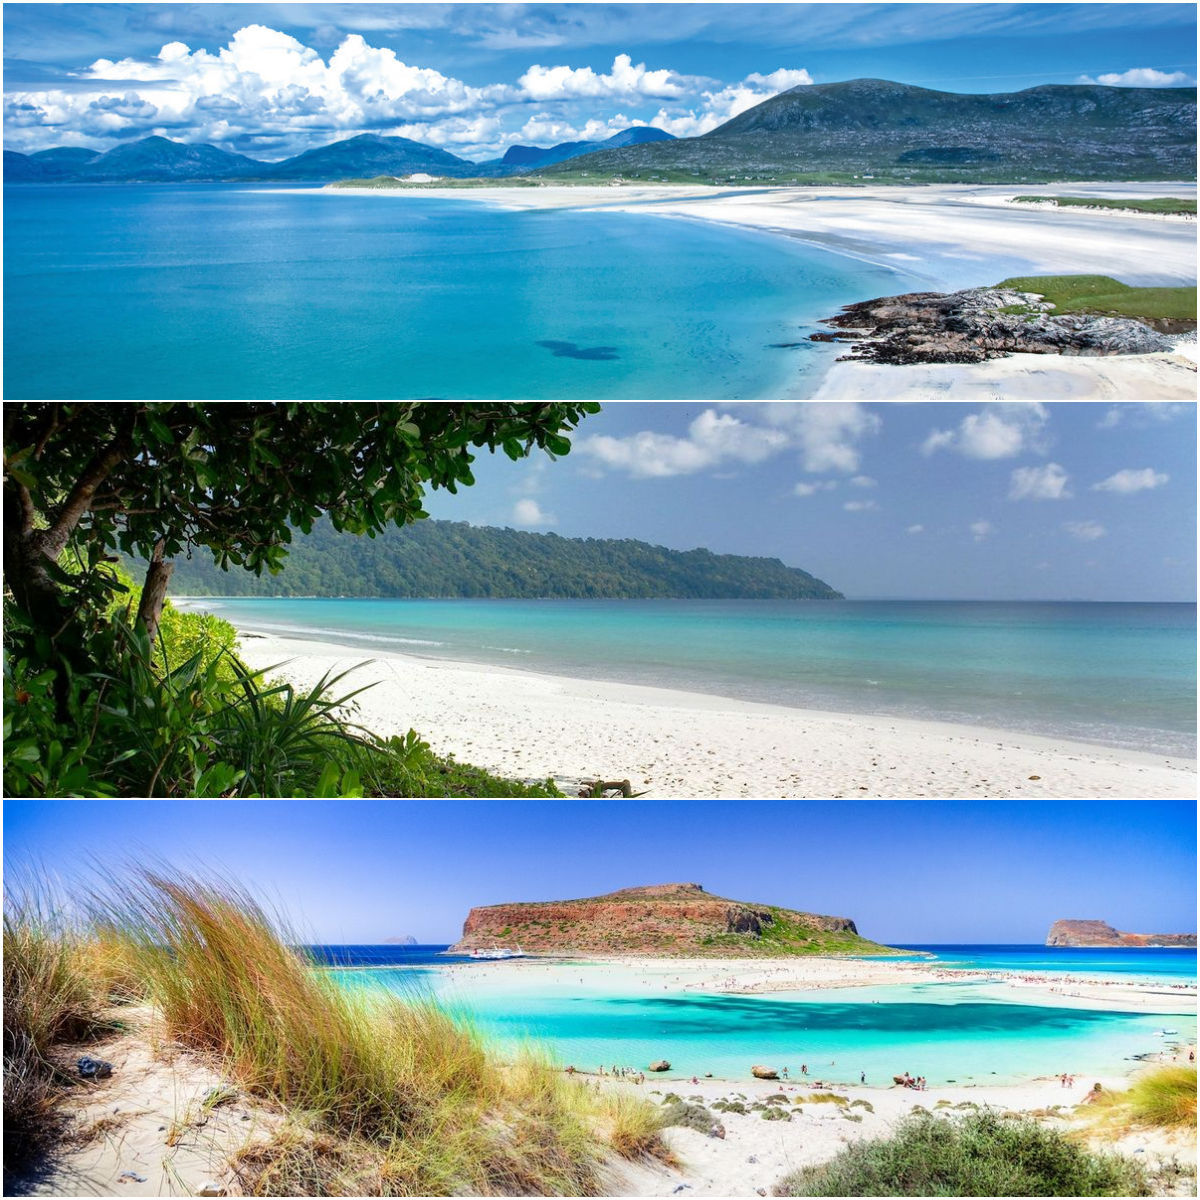 According to Tripadvisor these are the 11 best beaches in the world for